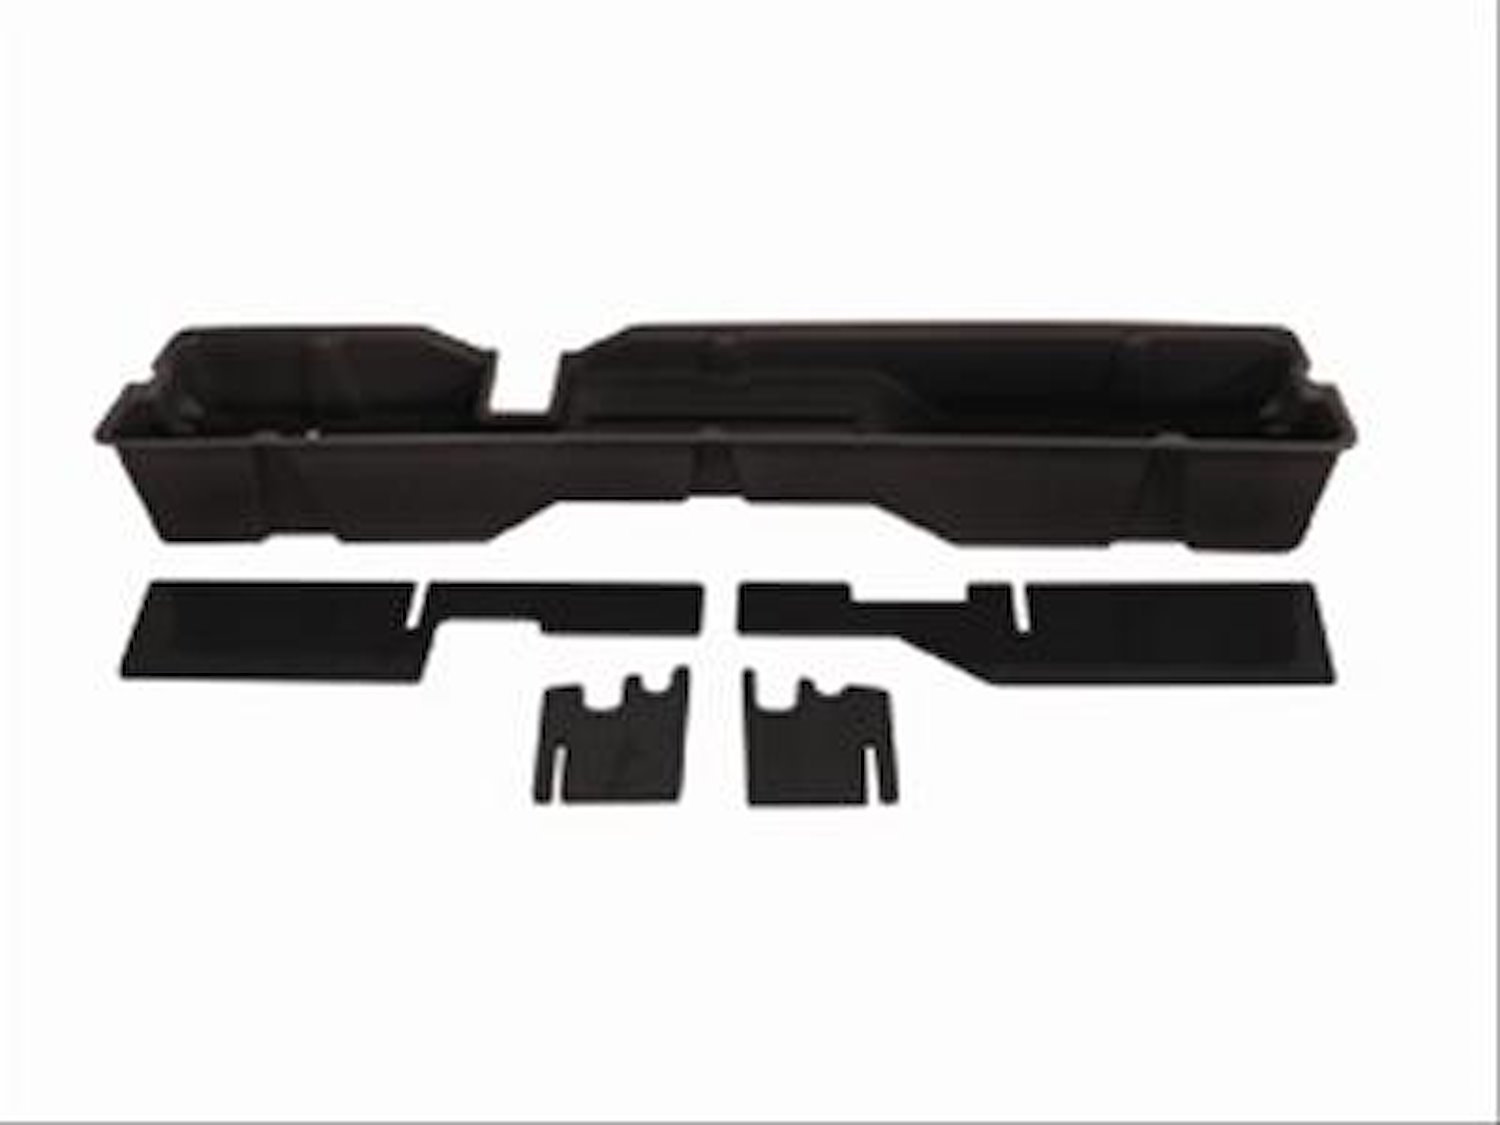 Underseat Cab Storage Bin for 2004-2008 Ford F-150 SuperCab and SuperCrew Cab Trucks